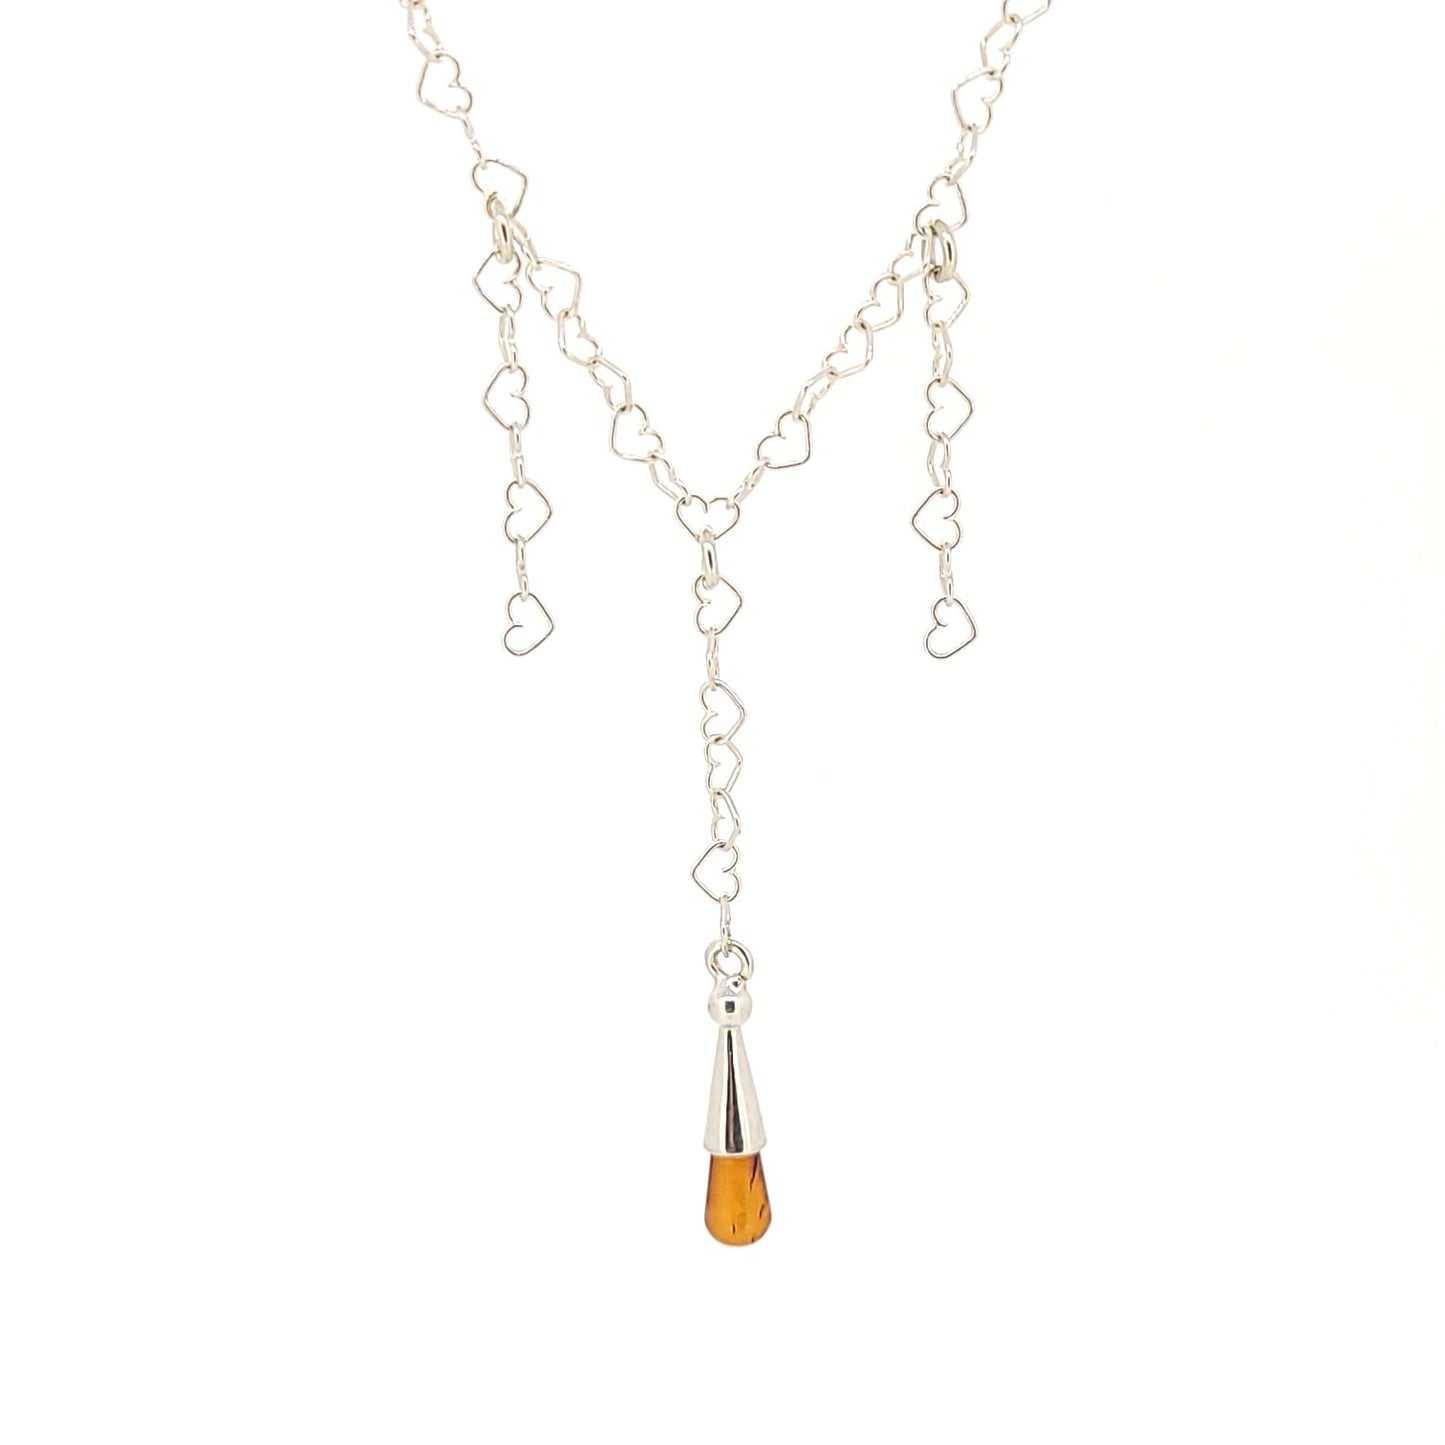 Amber Heart Dangle Necklace